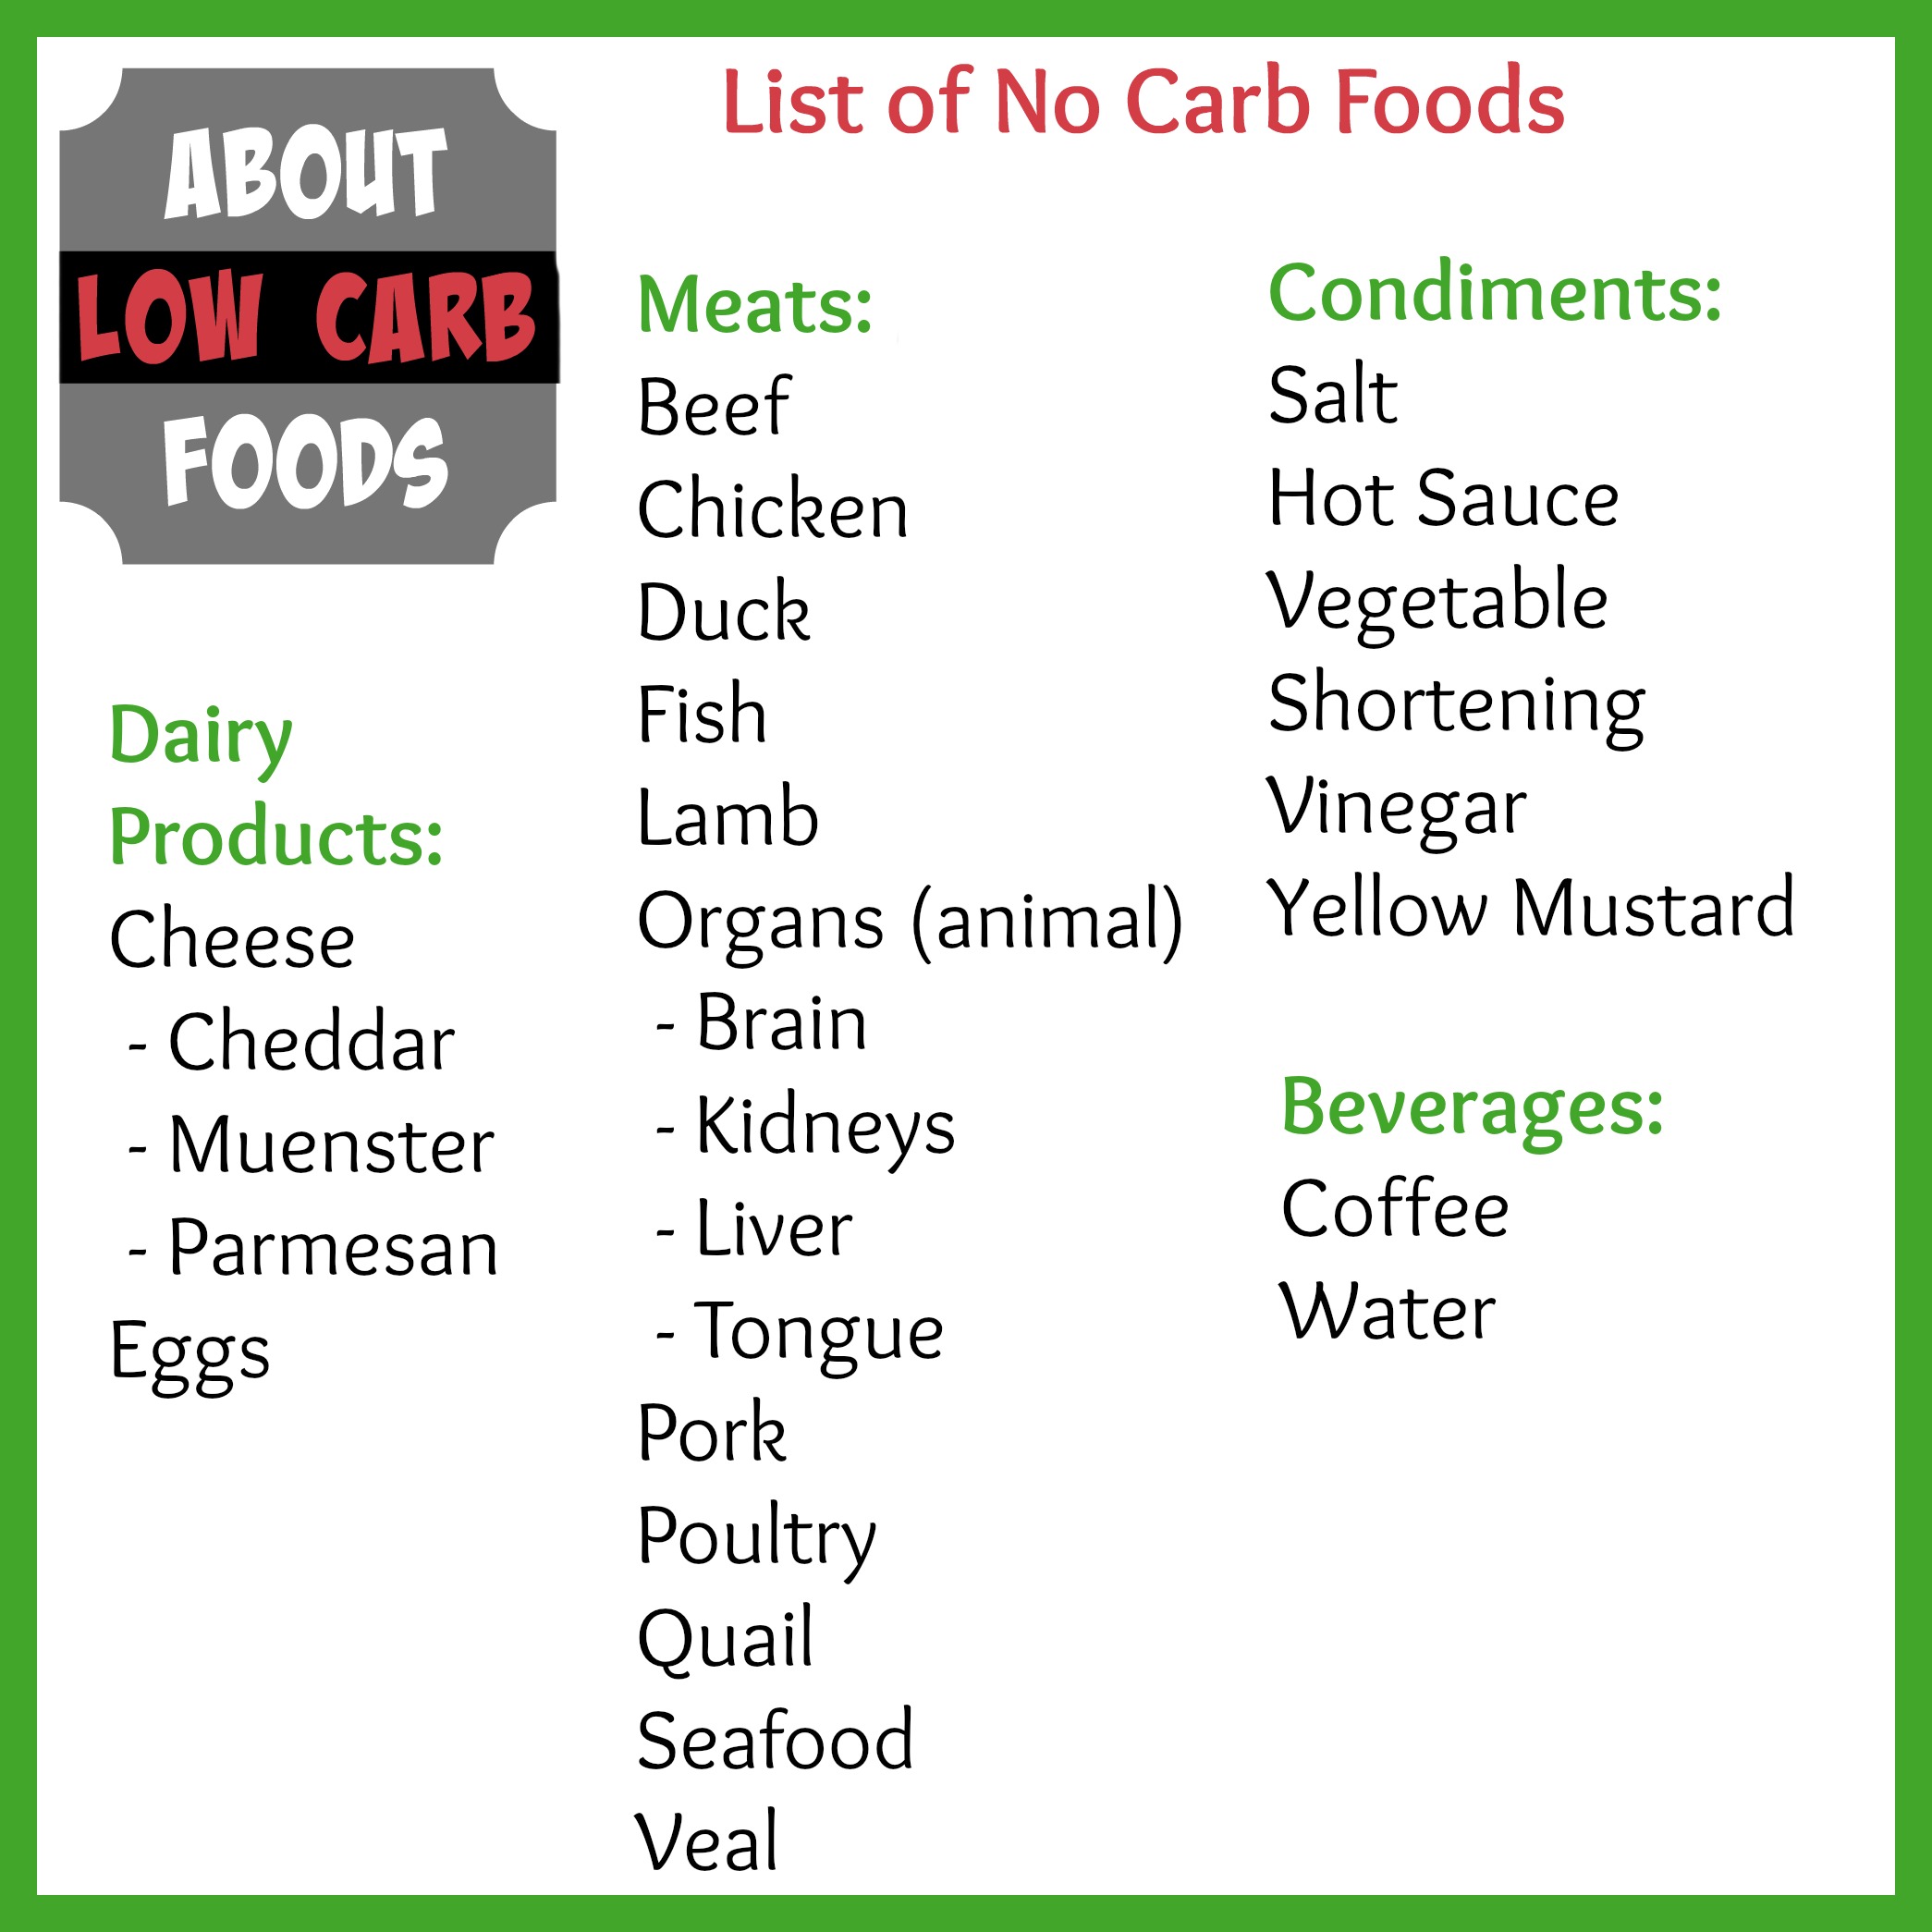 List of Low Carb Foods For Your Low Carb Lifestyle About Low Carb Foods